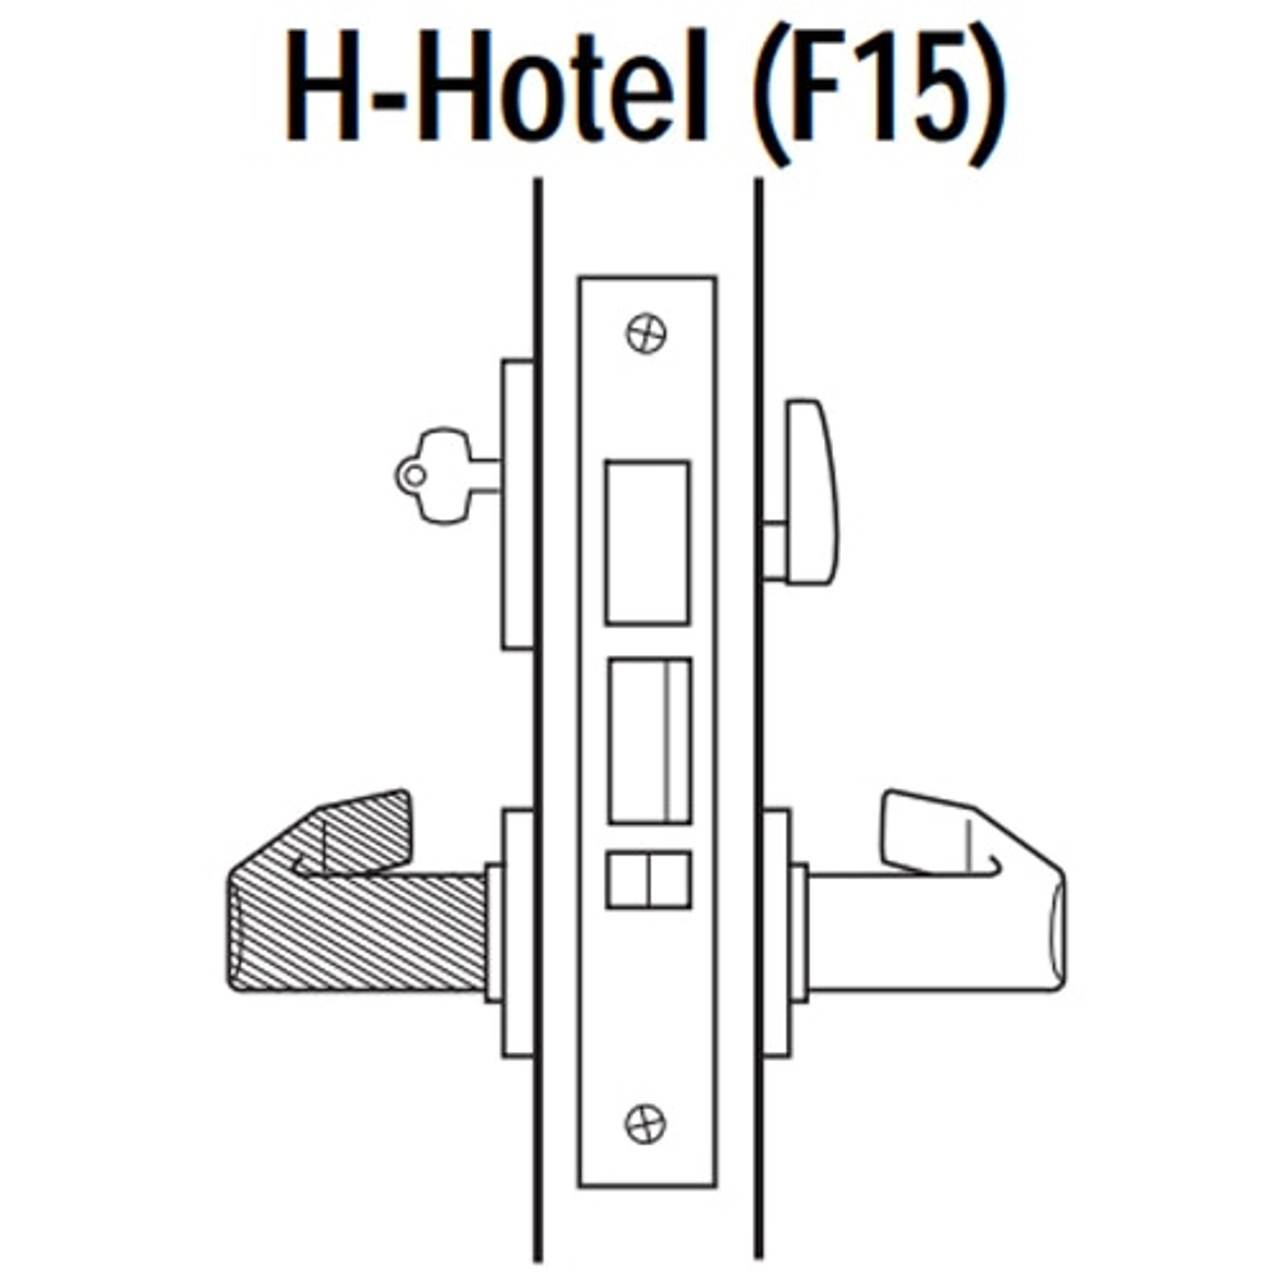 45H7H17LJ690 Best 40H Series Hotel with Deadbolt Heavy Duty Mortise Lever Lock with Gull Wing LH in Dark Bronze